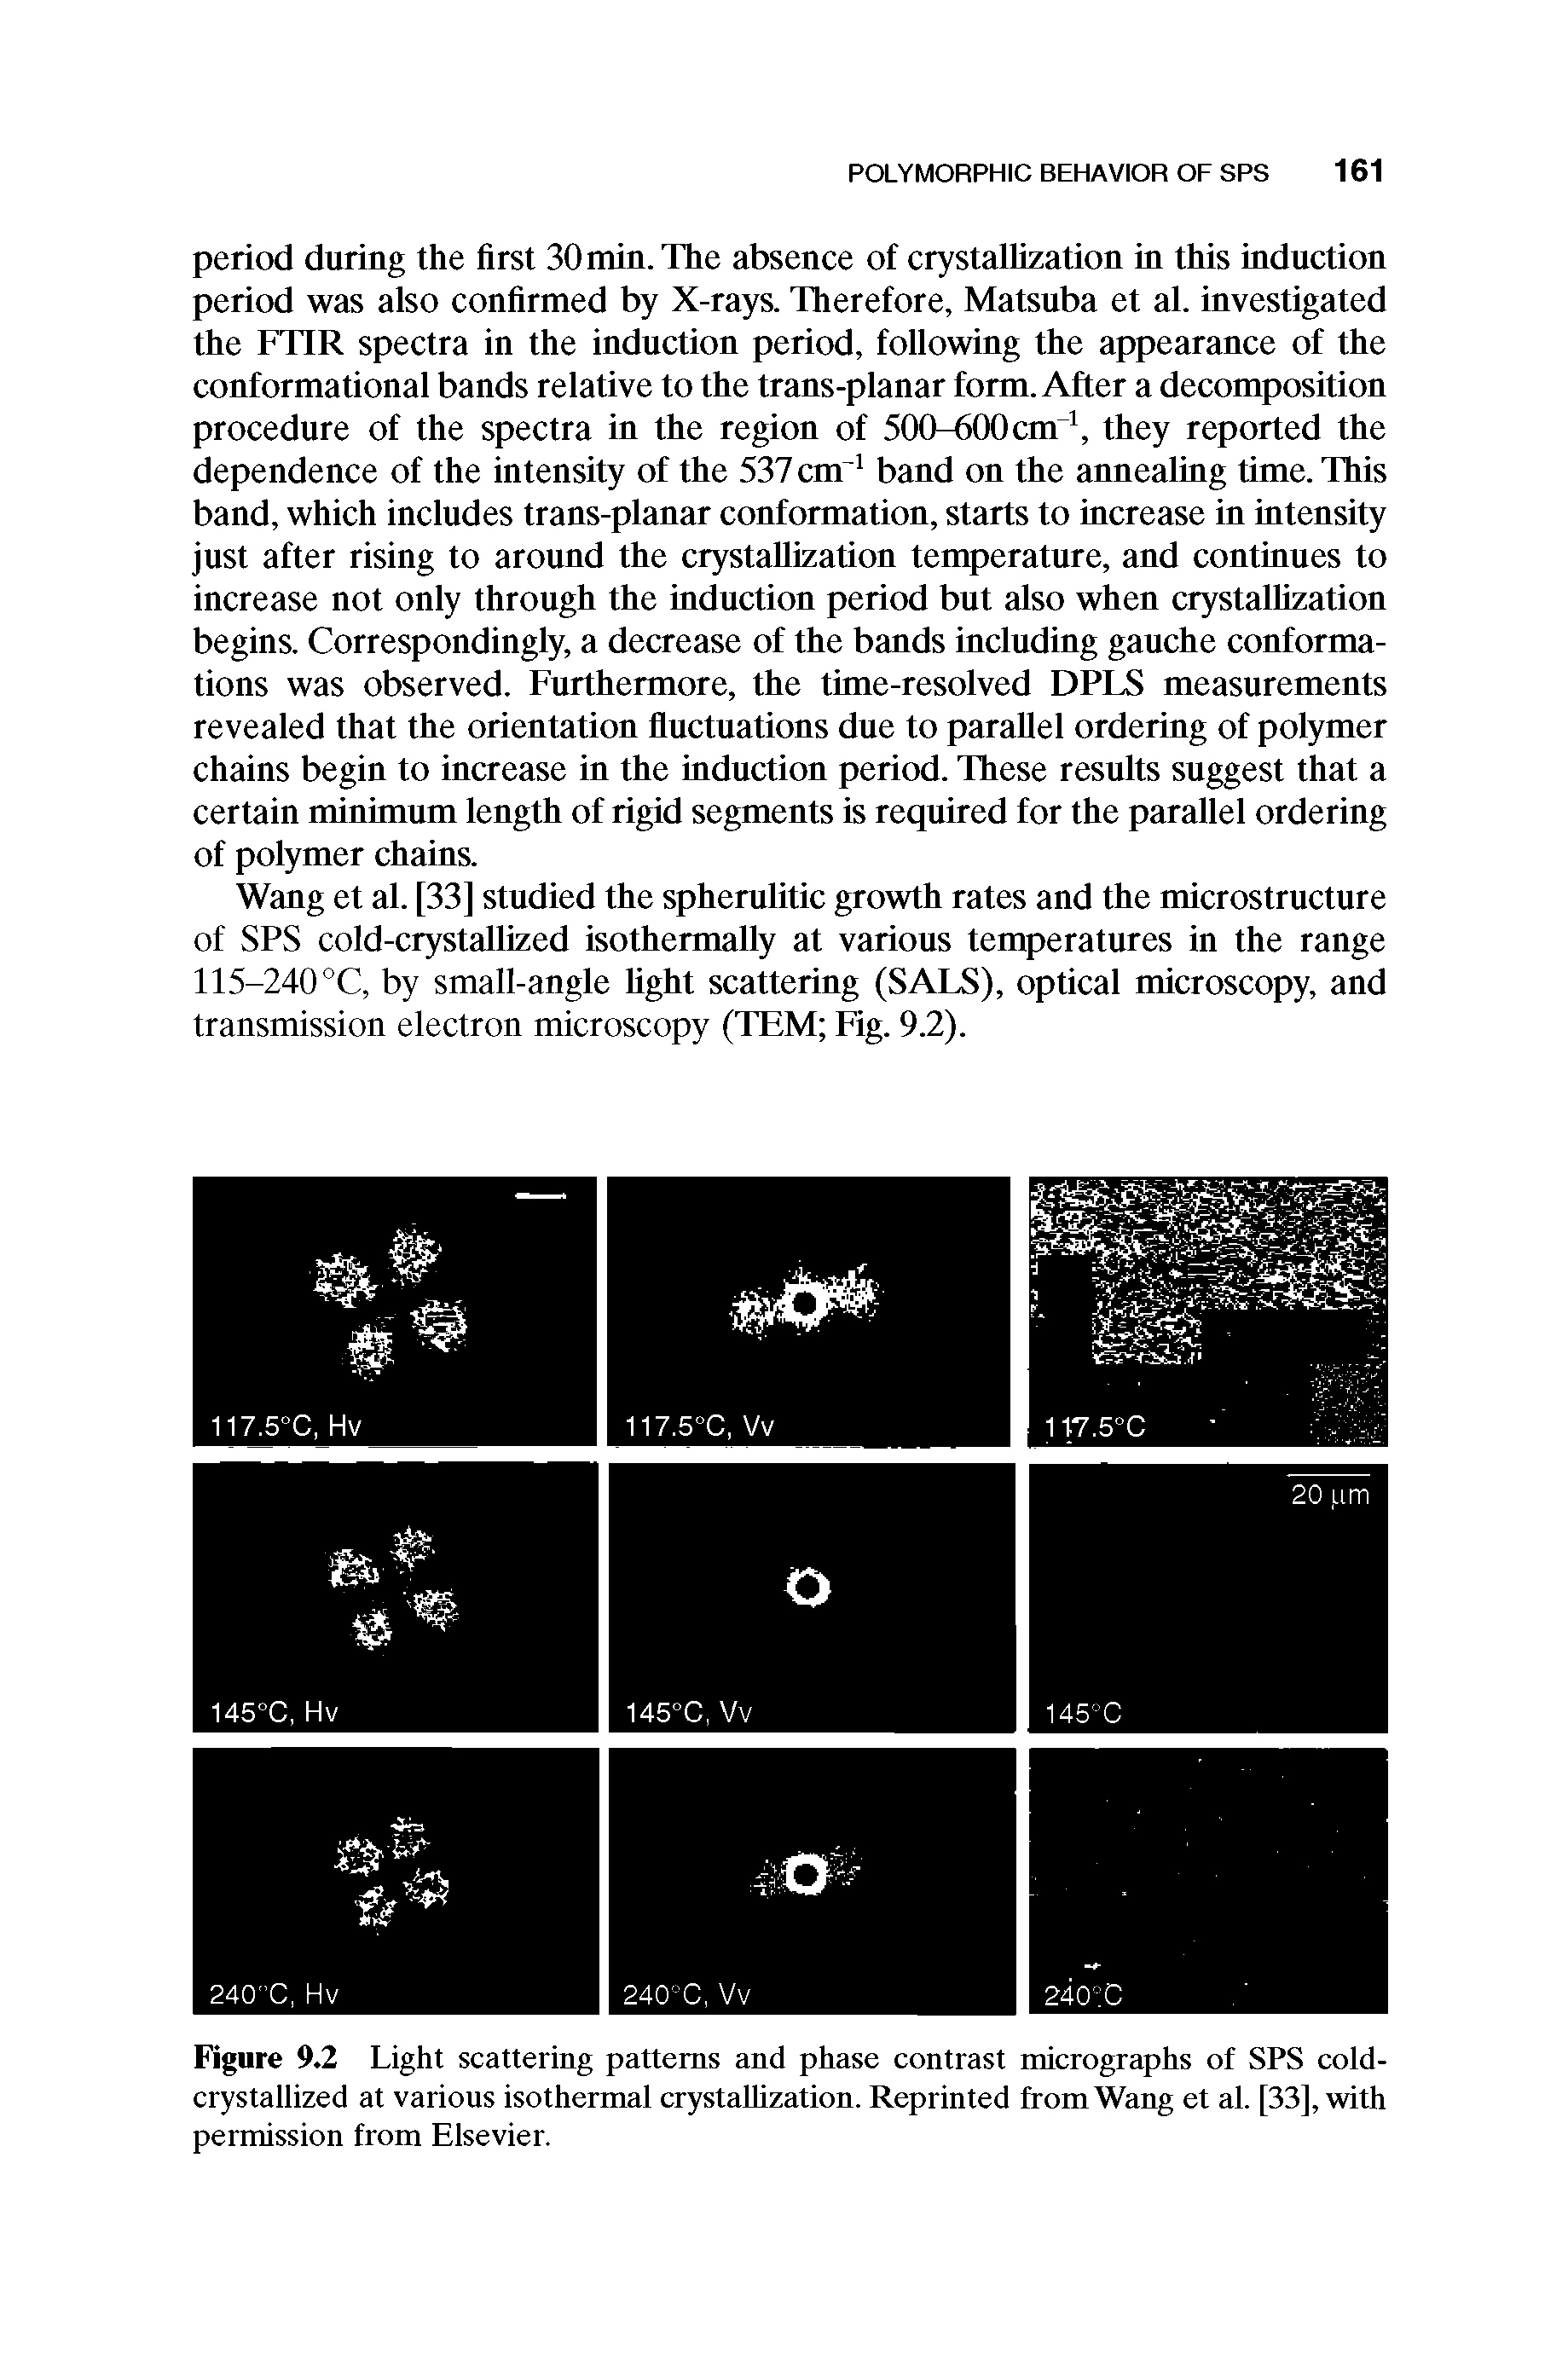 Figure 9.2 Light scattering patterns and phase contrast micrographs of SPS cold-crystallized at various isothermal crystallization. Reprinted from Wang et al. [33], with permission from Elsevier.